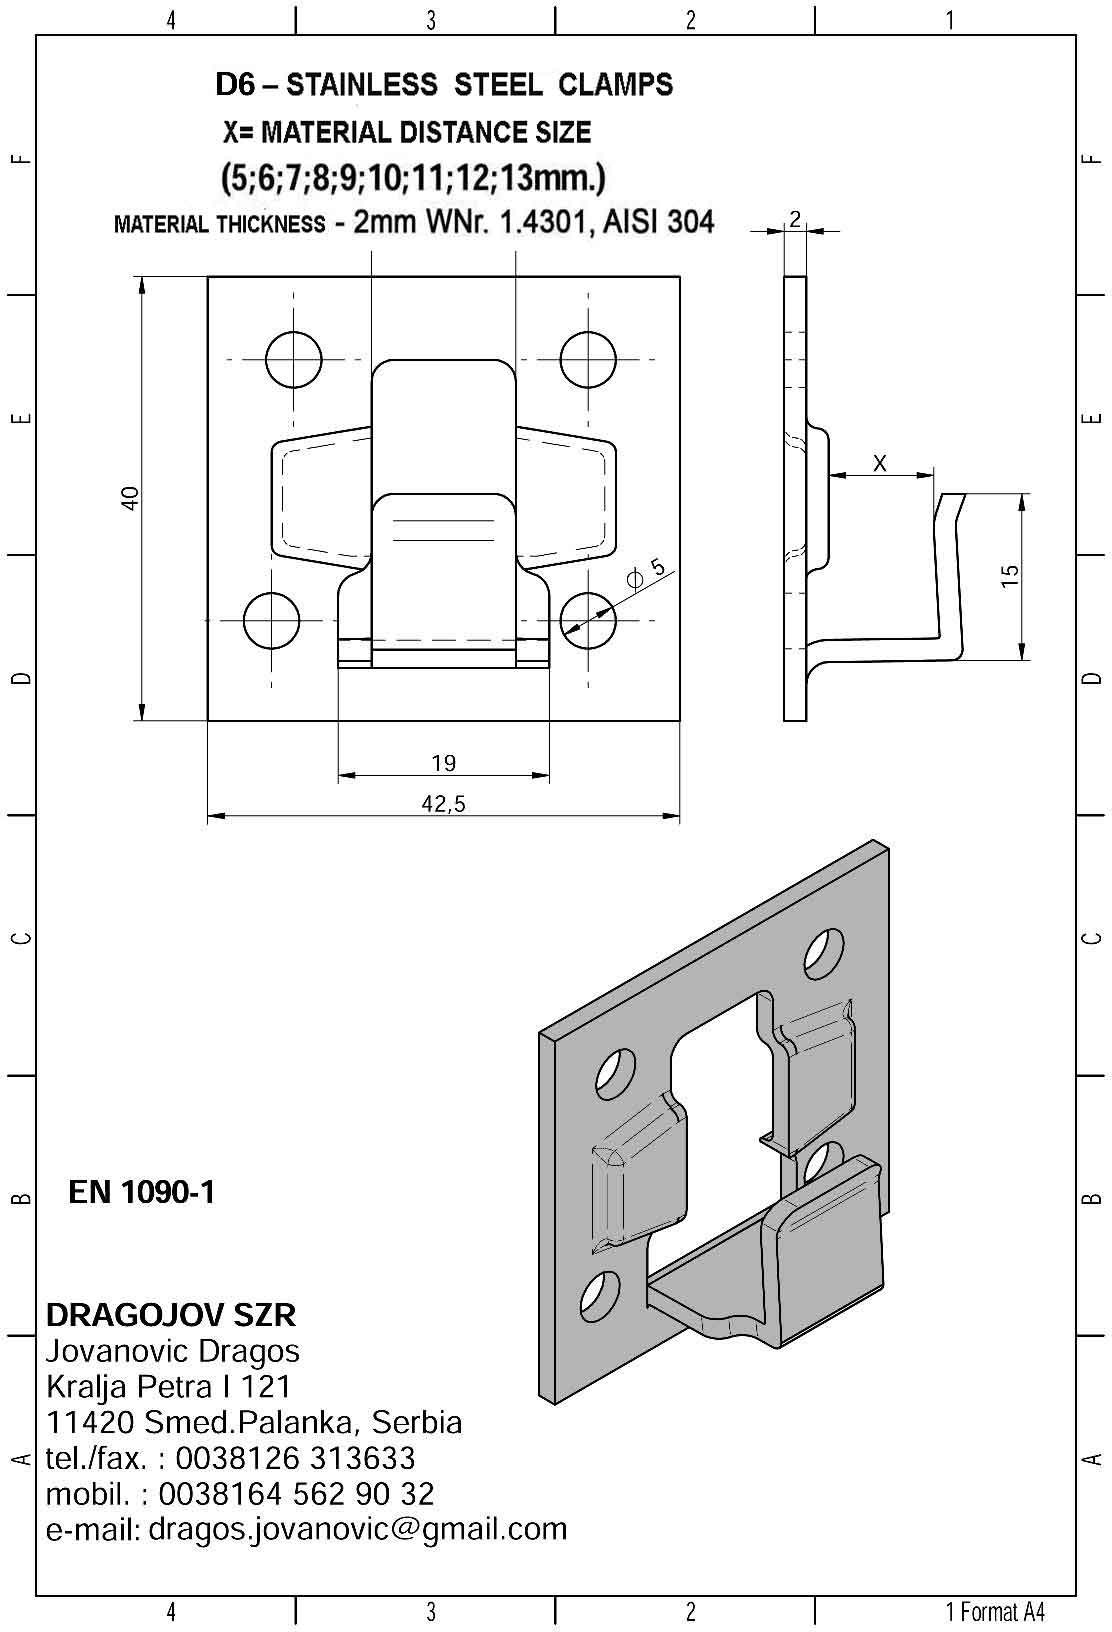 d6-stainless-steel-clamps